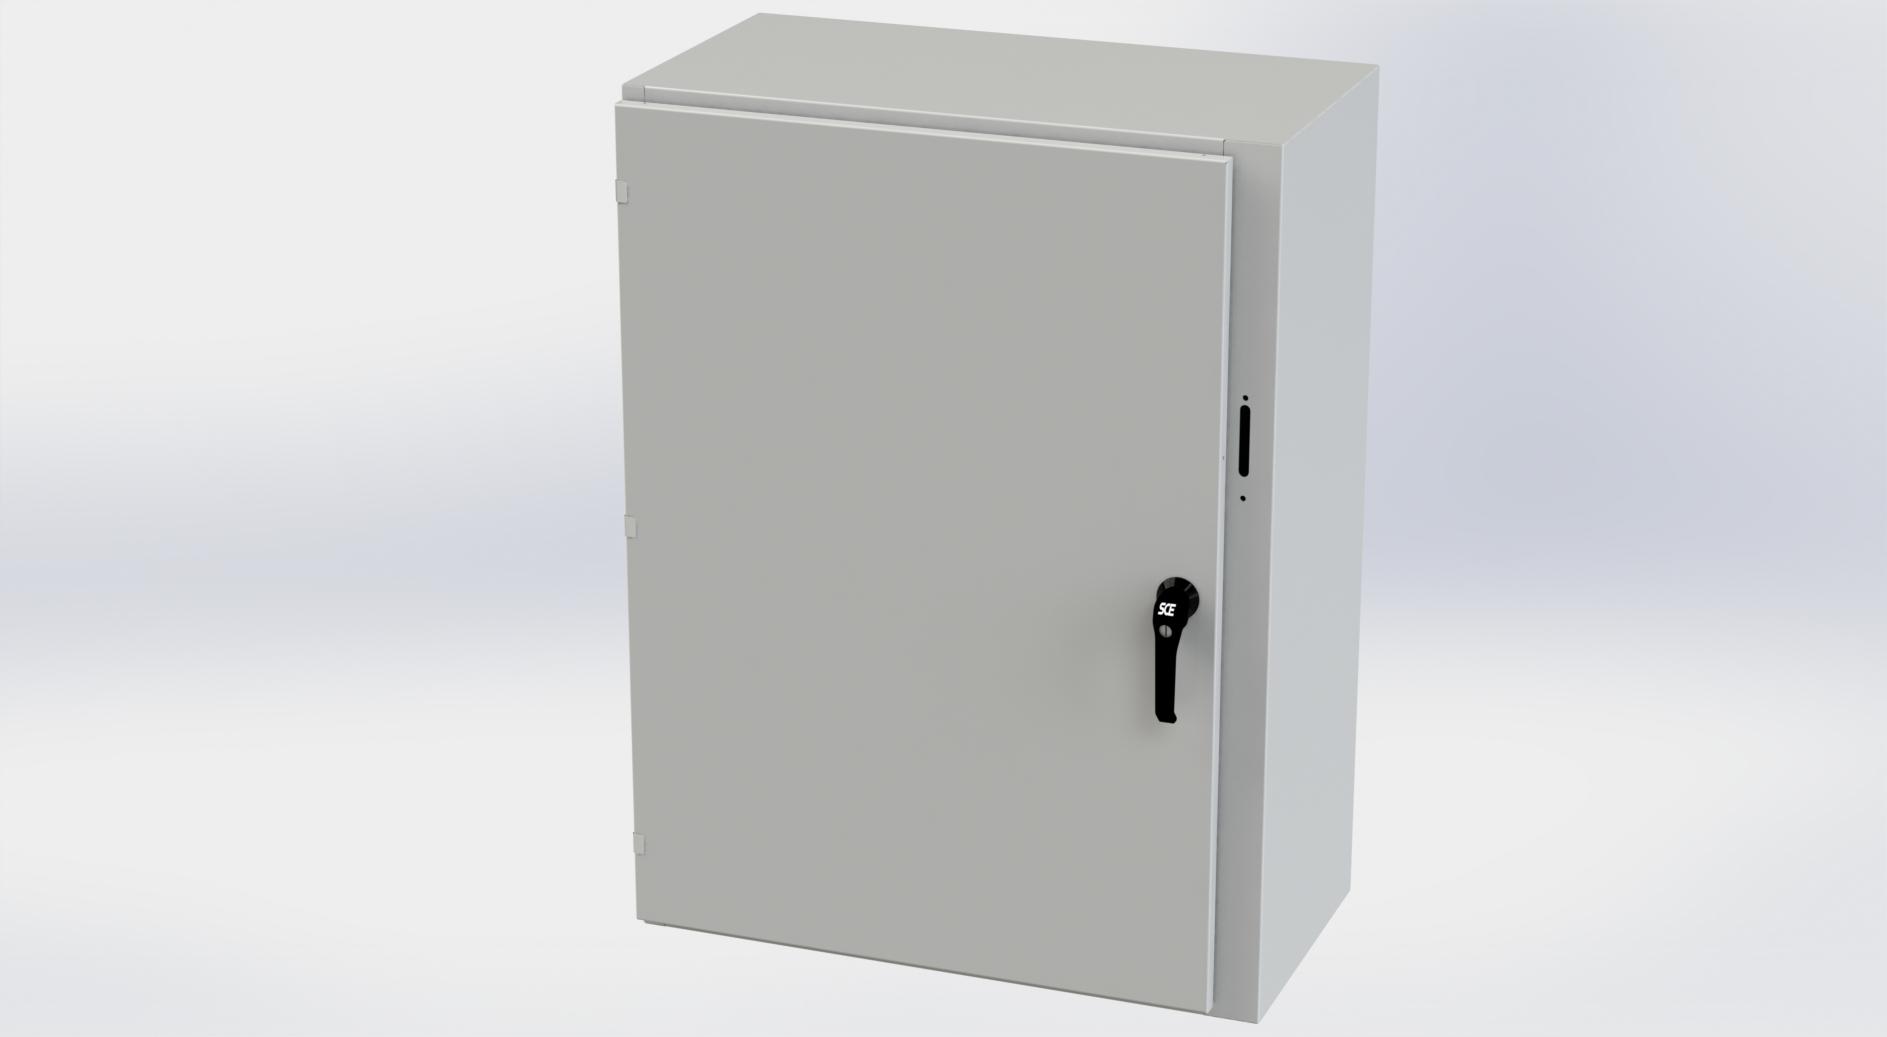 Saginaw Control SCE-42XEL3116LPLG XEL LP Enclosure, Height:42.00", Width:31.38", Depth:16.00", RAL 7035 gray powder coating inside and out. Optional sub-panels are powder coated white.